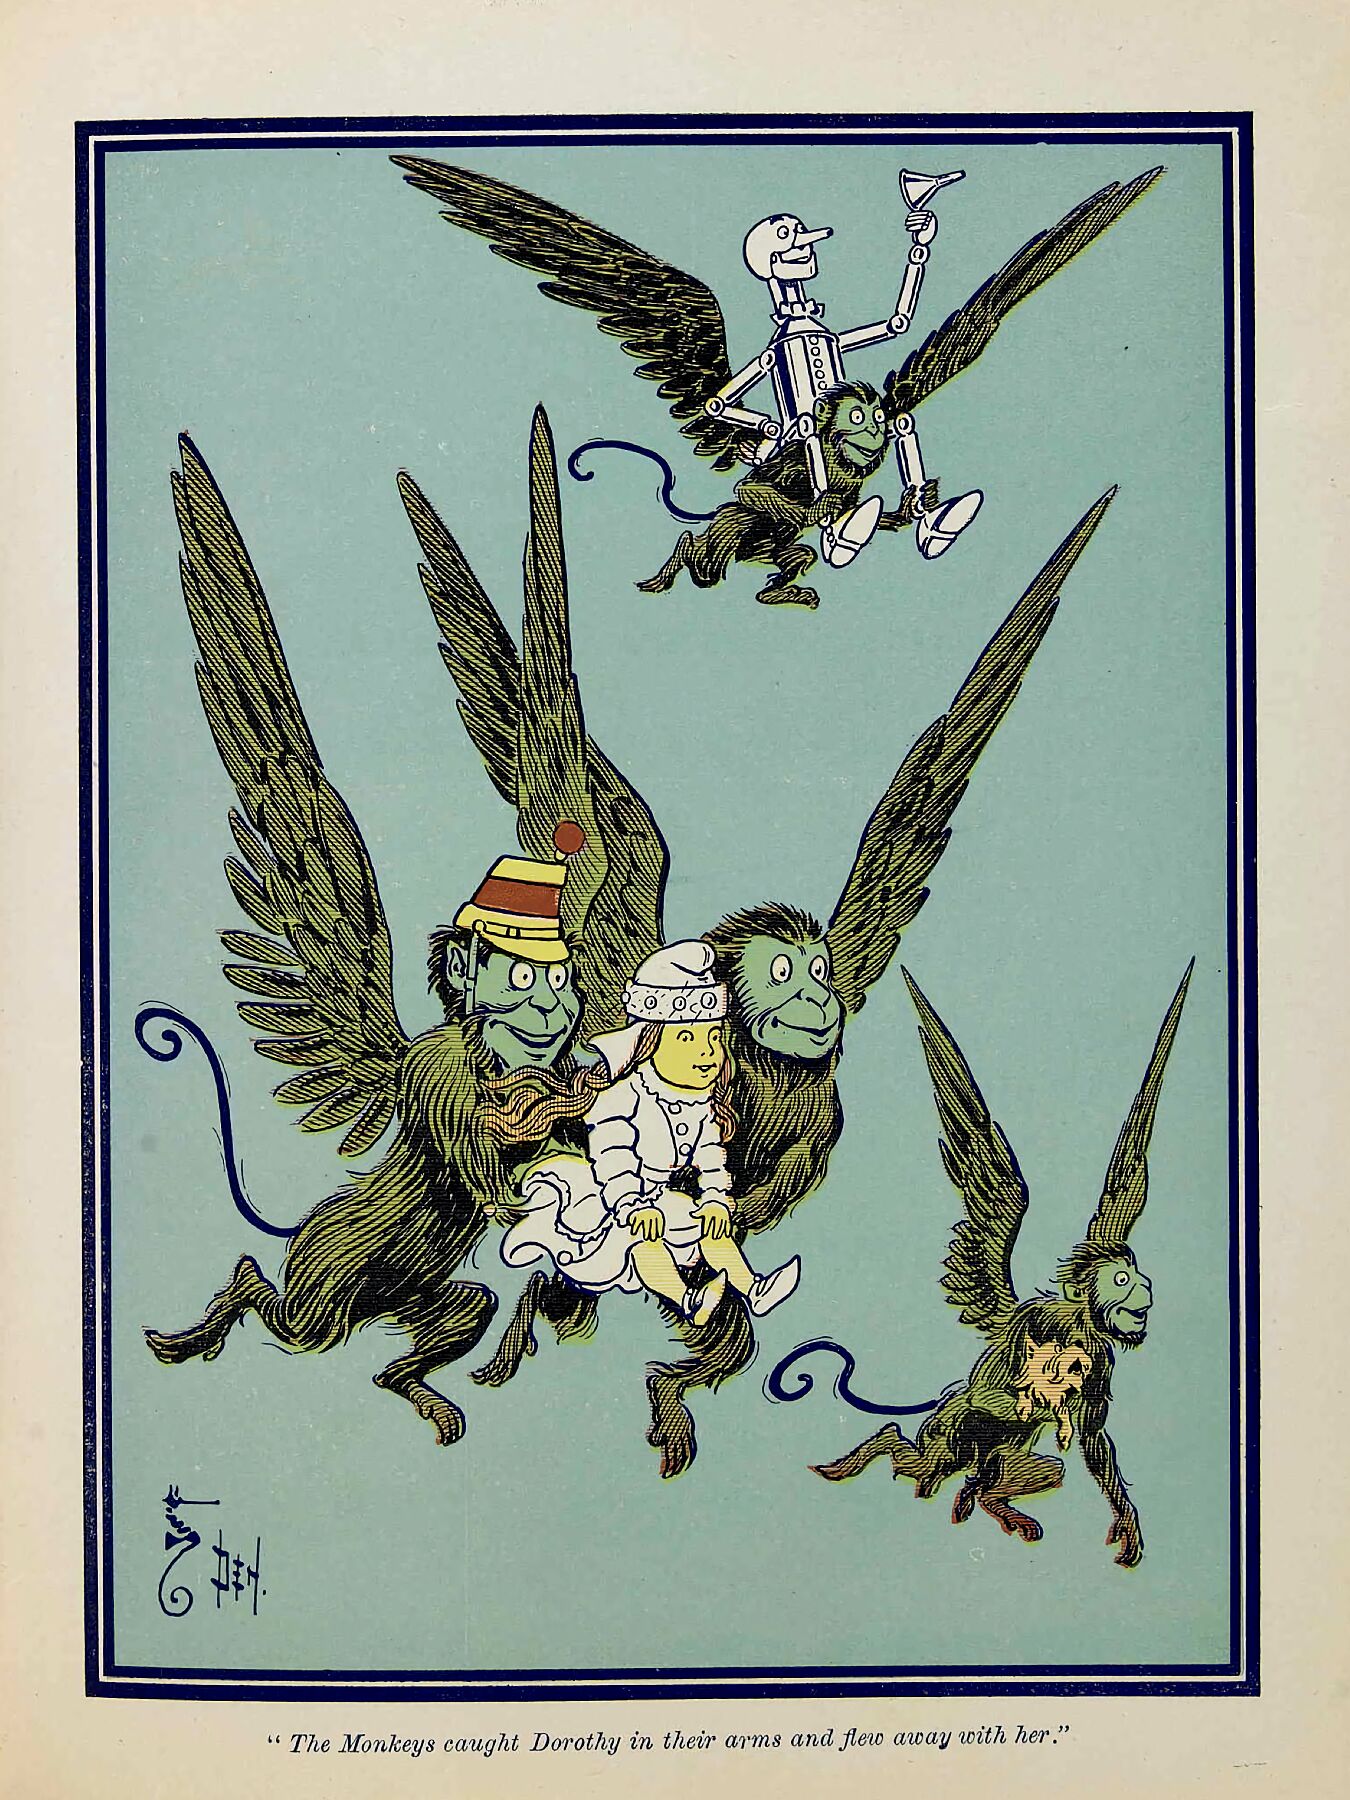 The Monkeys Caught Dorothy in Their Arms and Flew Away With Her by W. W. Denslow for the Wonderful Wizard of Oz - 1900